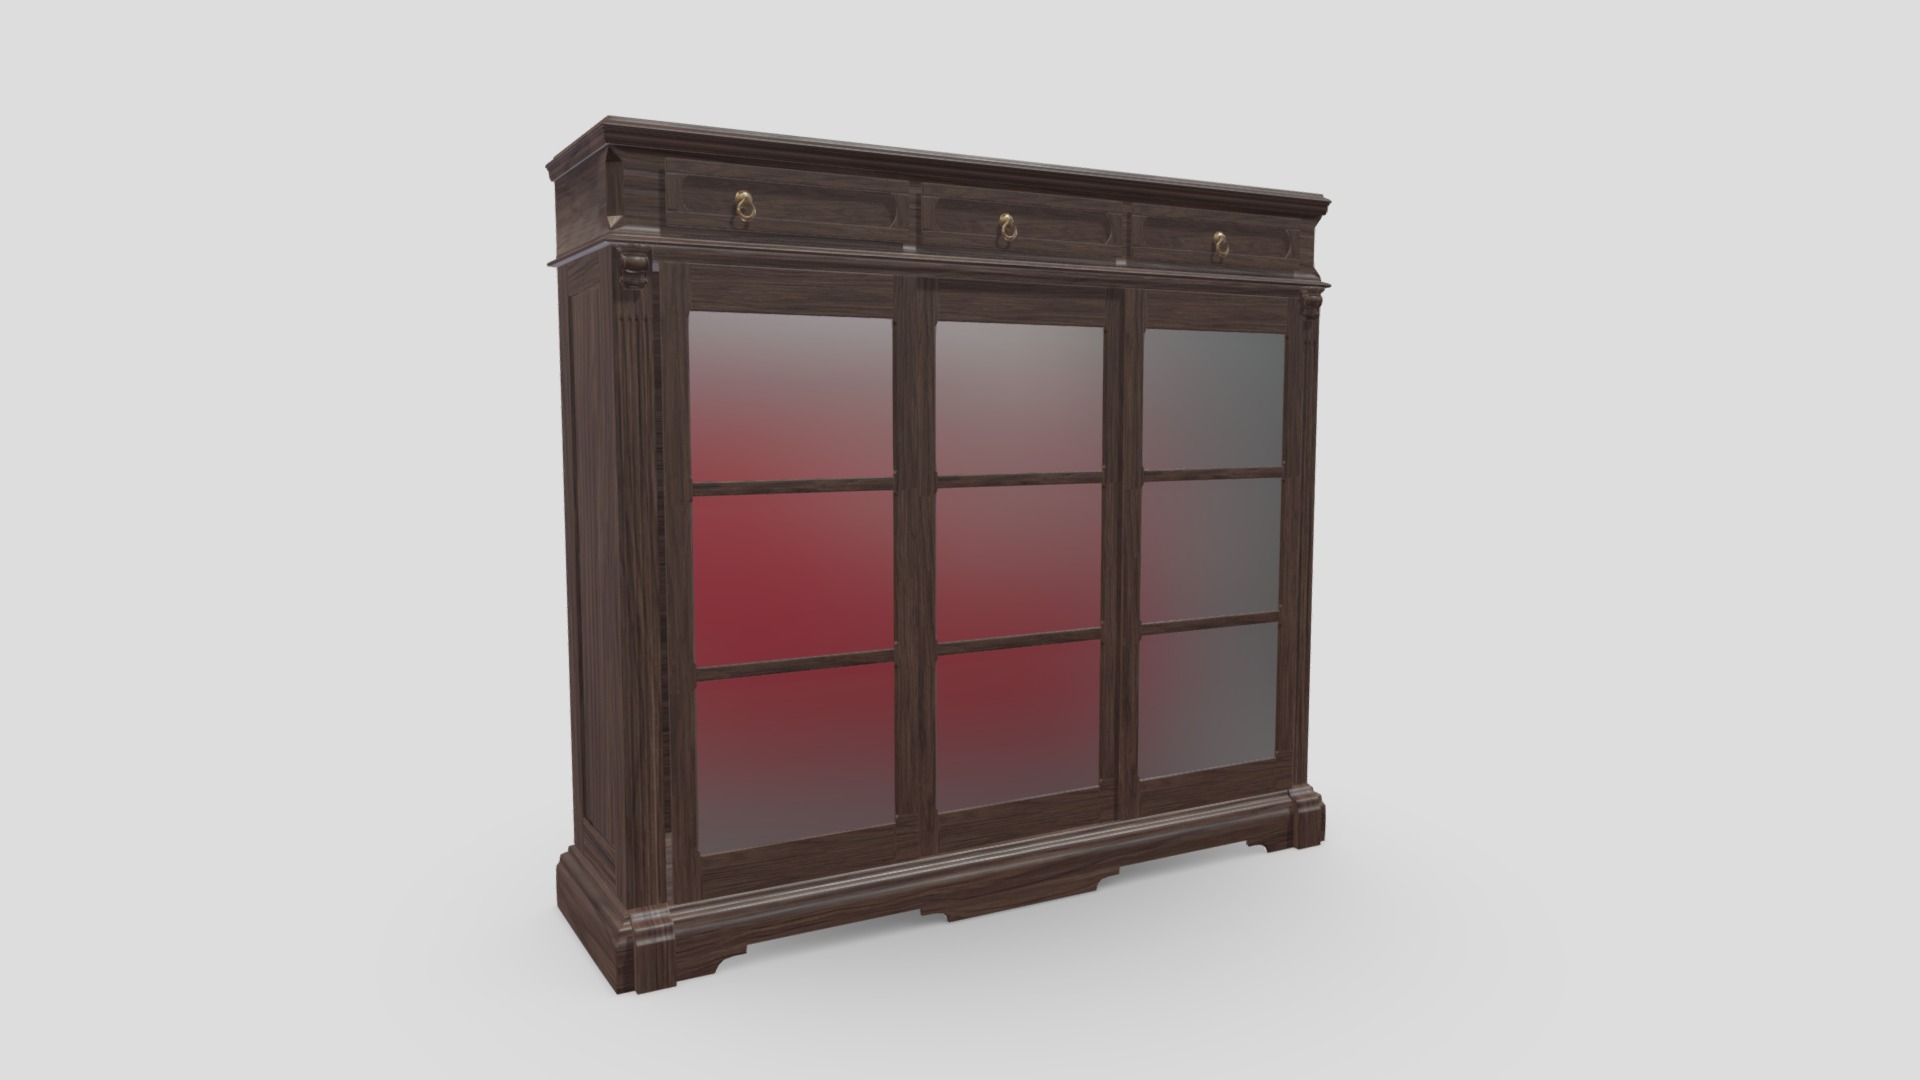 3D model Antique Cupboard 20 - This is a 3D model of the Antique Cupboard 20. The 3D model is about a wooden cabinet with a glass door.